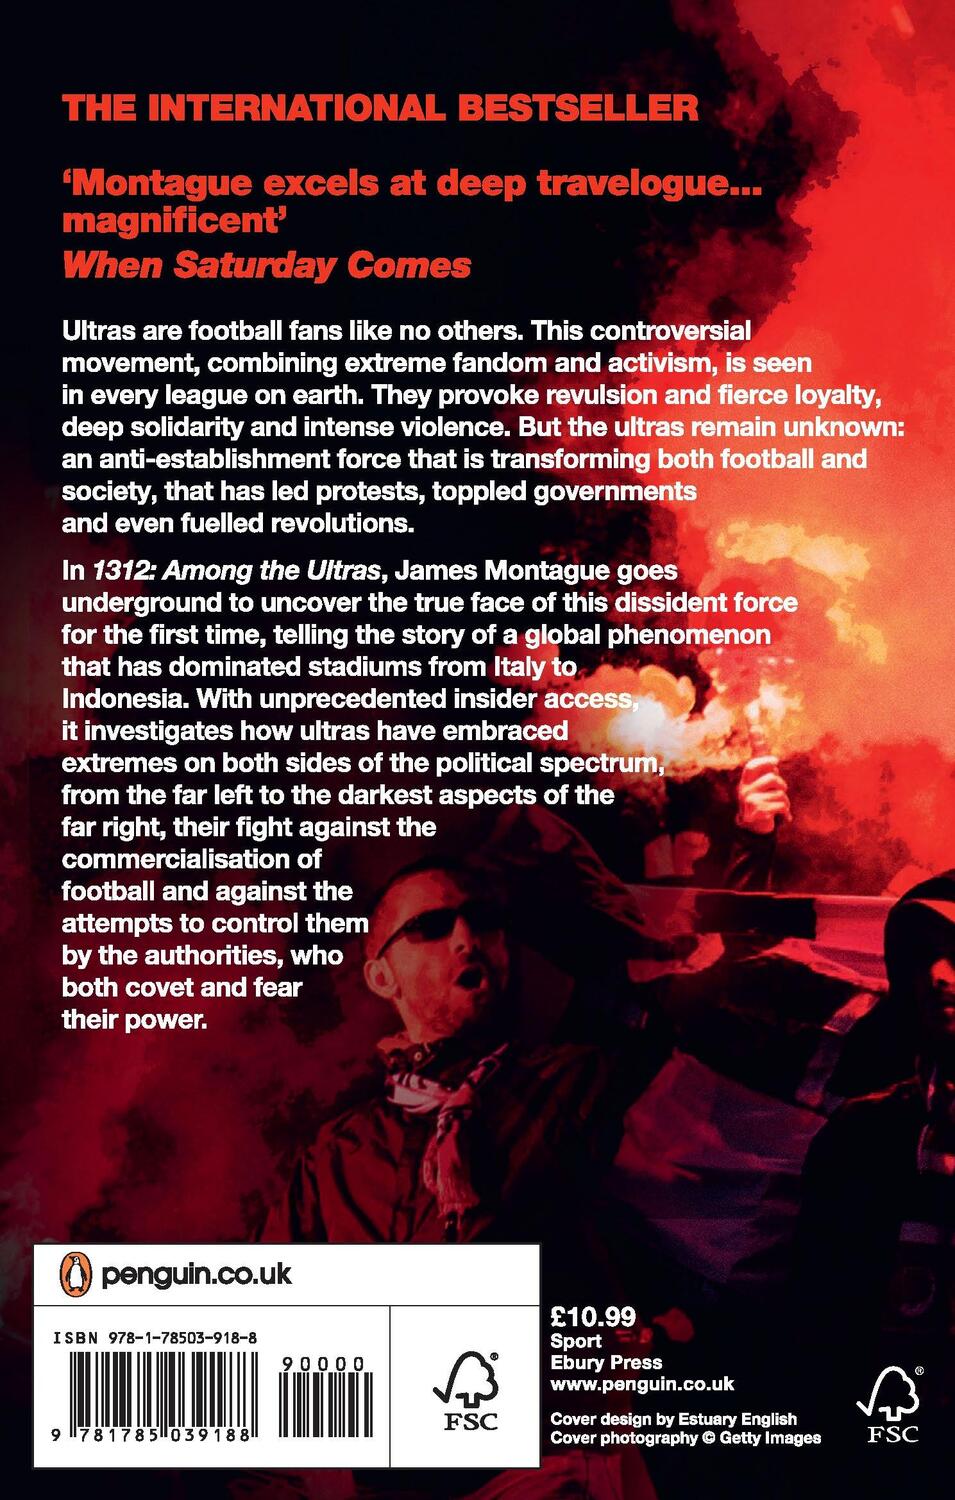 Rückseite: 9781785039188 | 1312: Among the Ultras | A journey with the world's most extreme fans